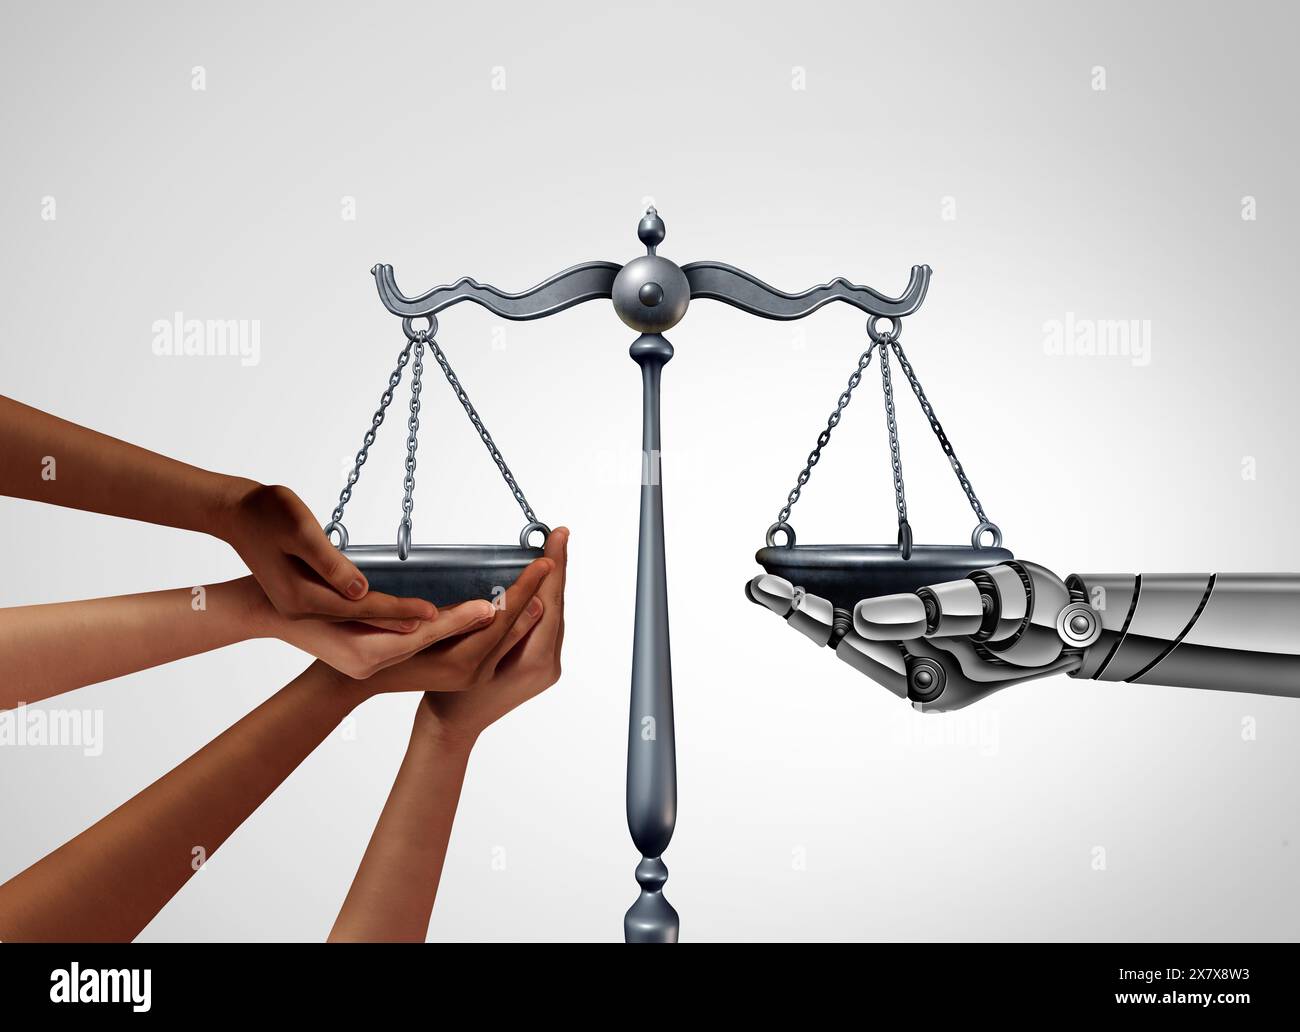 AI and community law or artificial intelligence and the legal system as ethical issues related to advanced machine learning and technology ethics in r Stock Photo